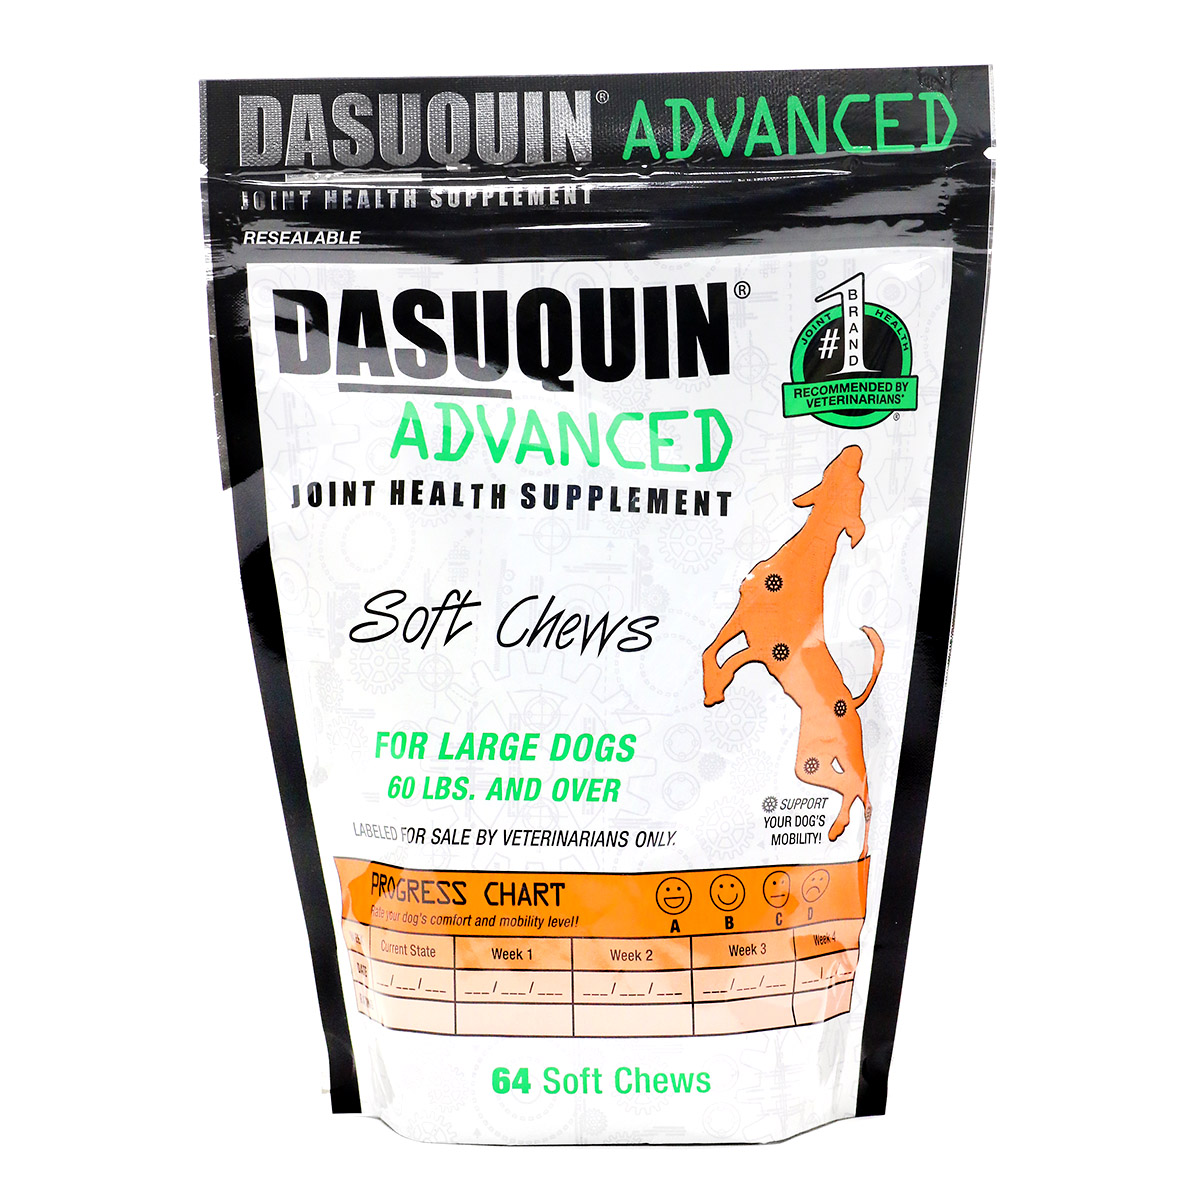 barr-north-veterinary-services-dasuquin-advanced-soft-chews-for-large